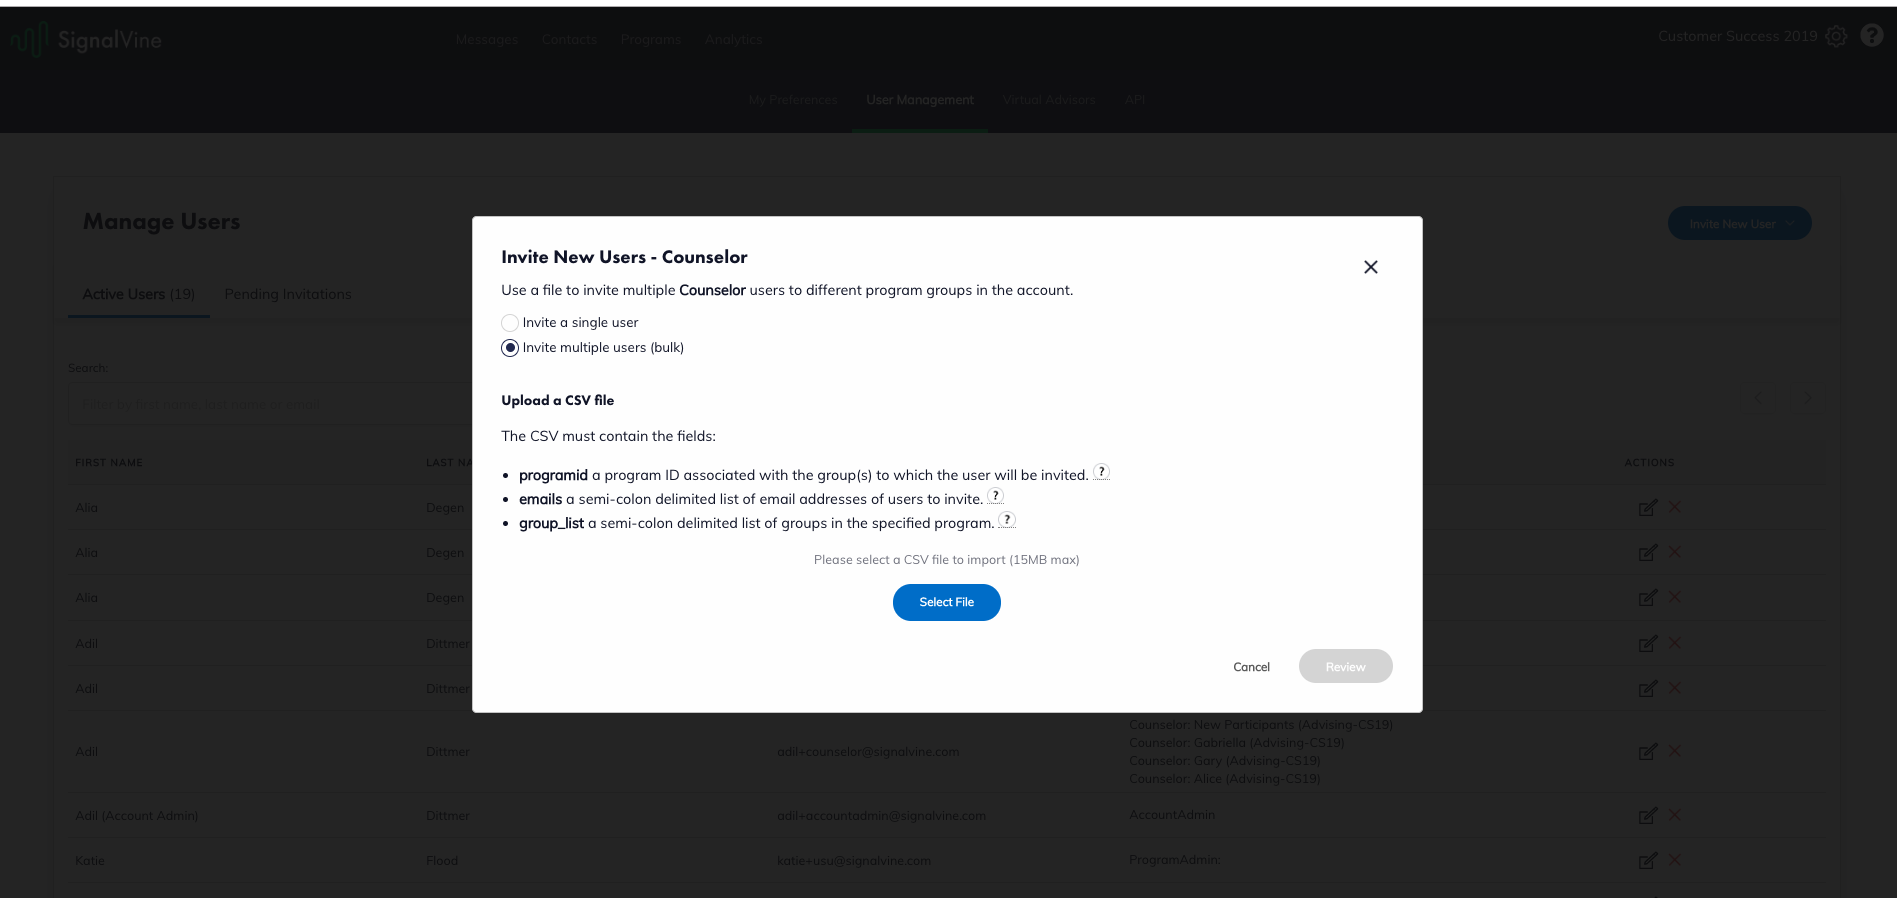 Image of the Invite New Users - Counselor pop-up, with Invite multiple users (bulk) selected